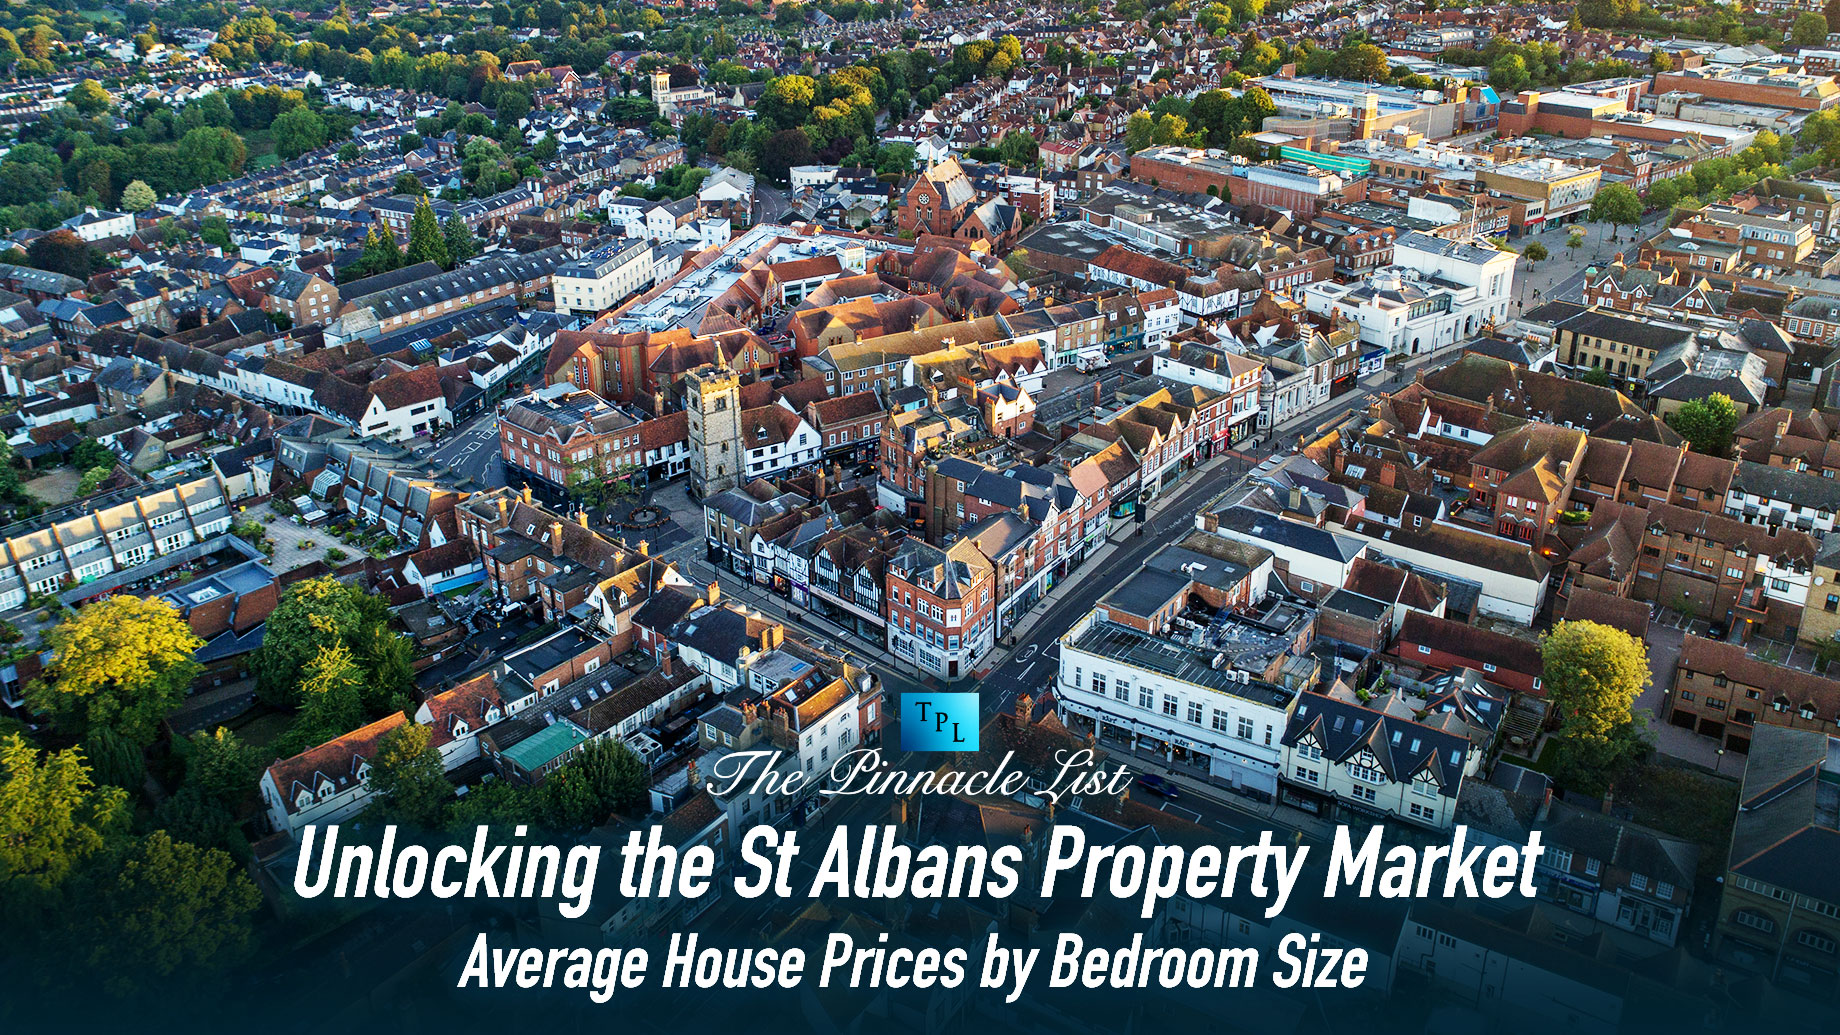 Unlocking the St Albans Property Market: Average House Prices by Bedroom Size